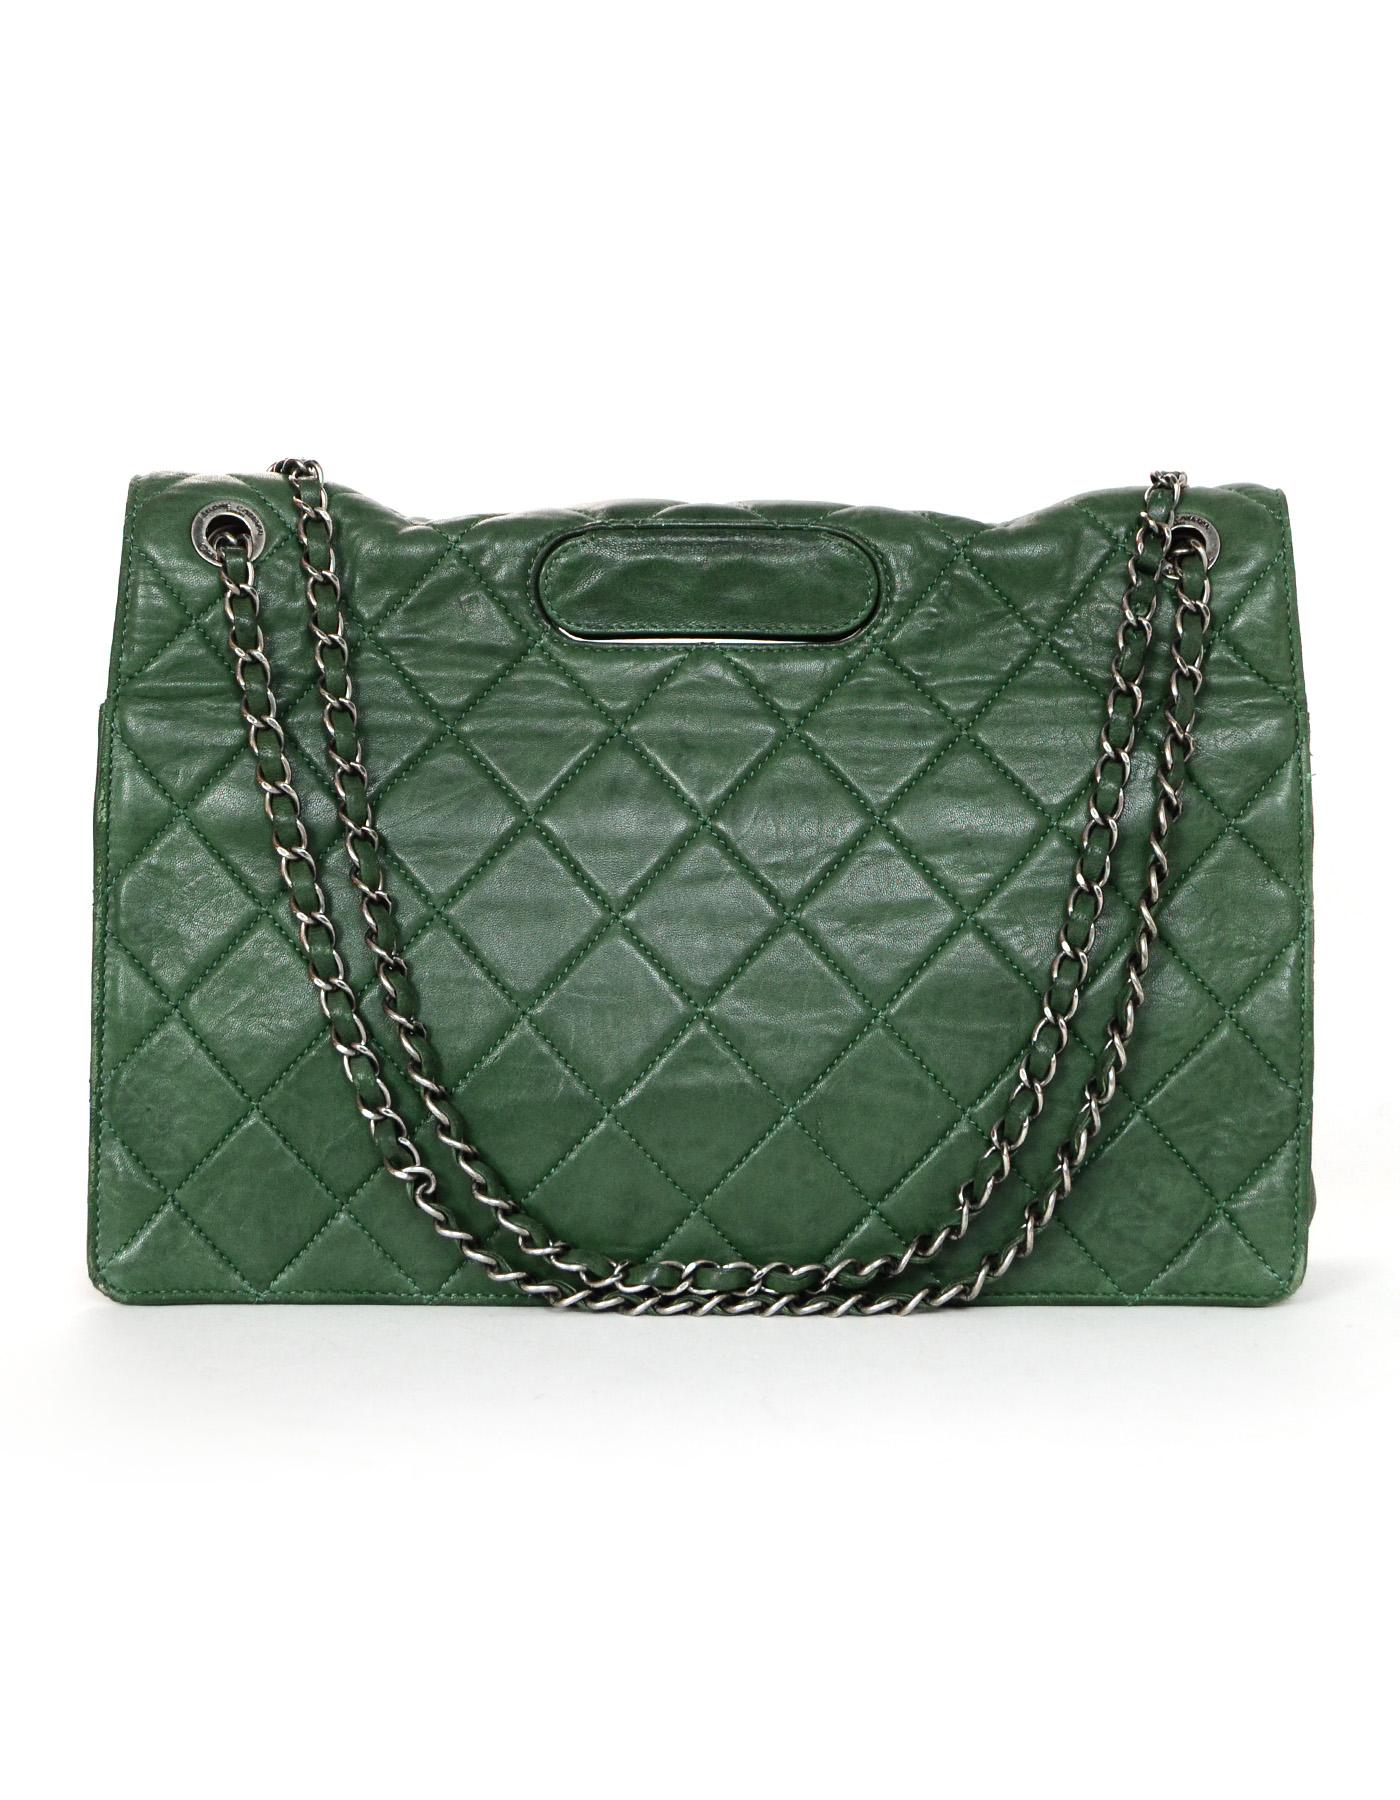 Gray Chanel Green Calf Leather Quilted Paris-Byzance Take Away 2.55 Reissue Flap Bag 